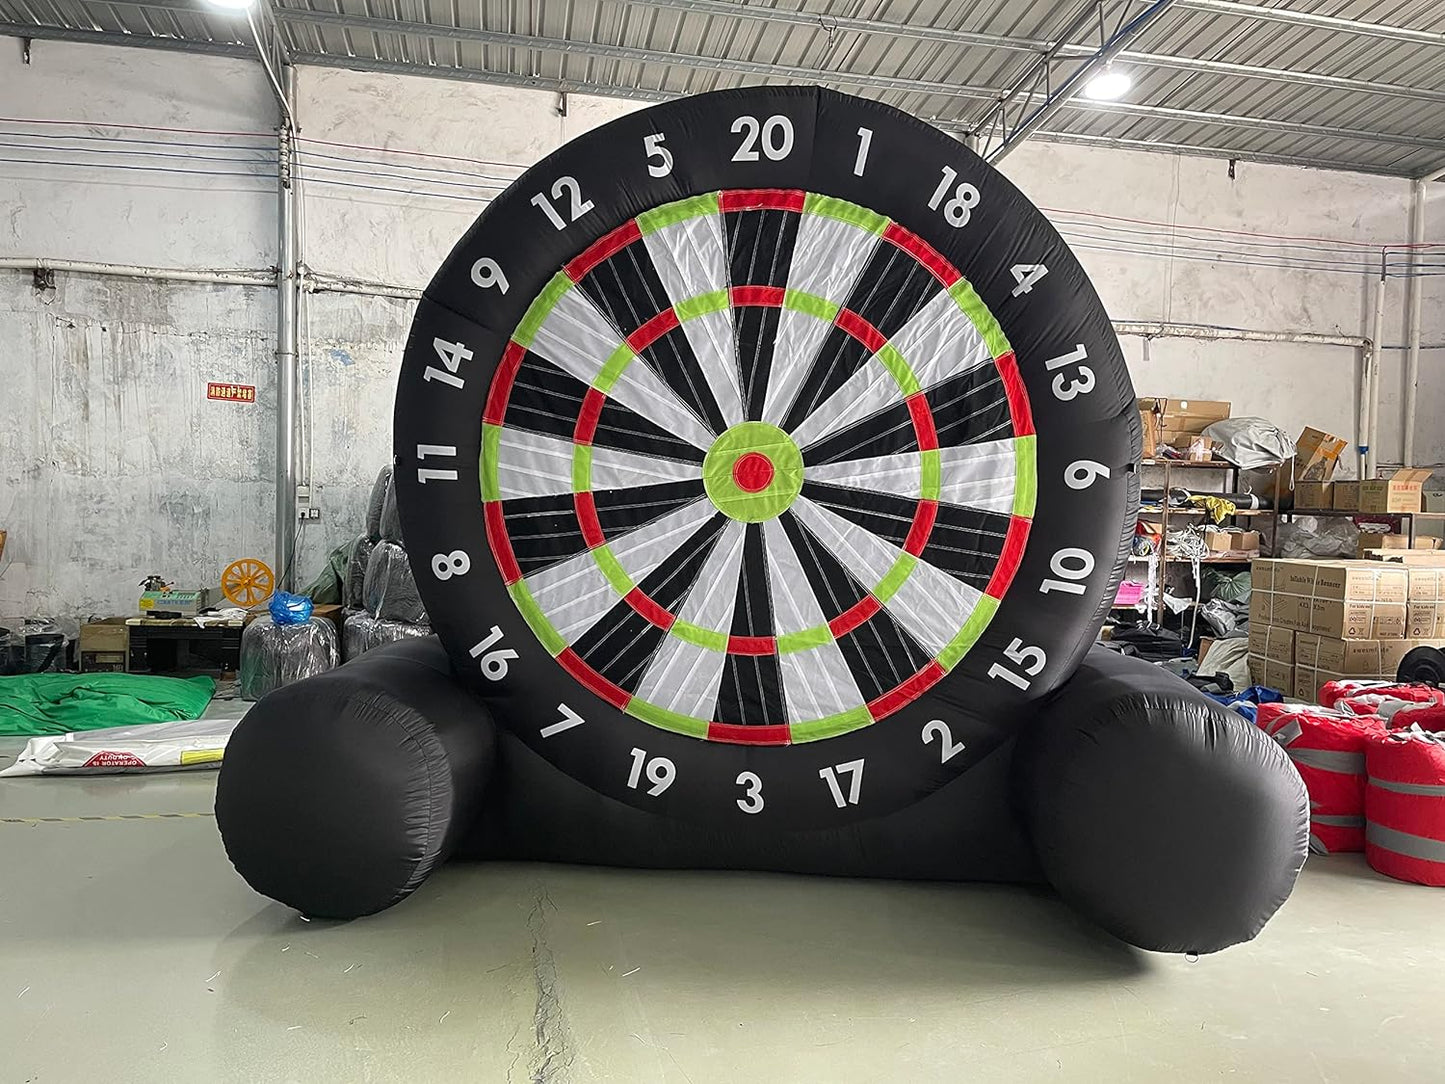 King Inflatable Soccer Darts Board Giant Outdoor Soccer Darts Board with 8Pcs Soccer Ball & 370W Blower for Kick Dartboard Sport Game (10Ft Tall, Black)